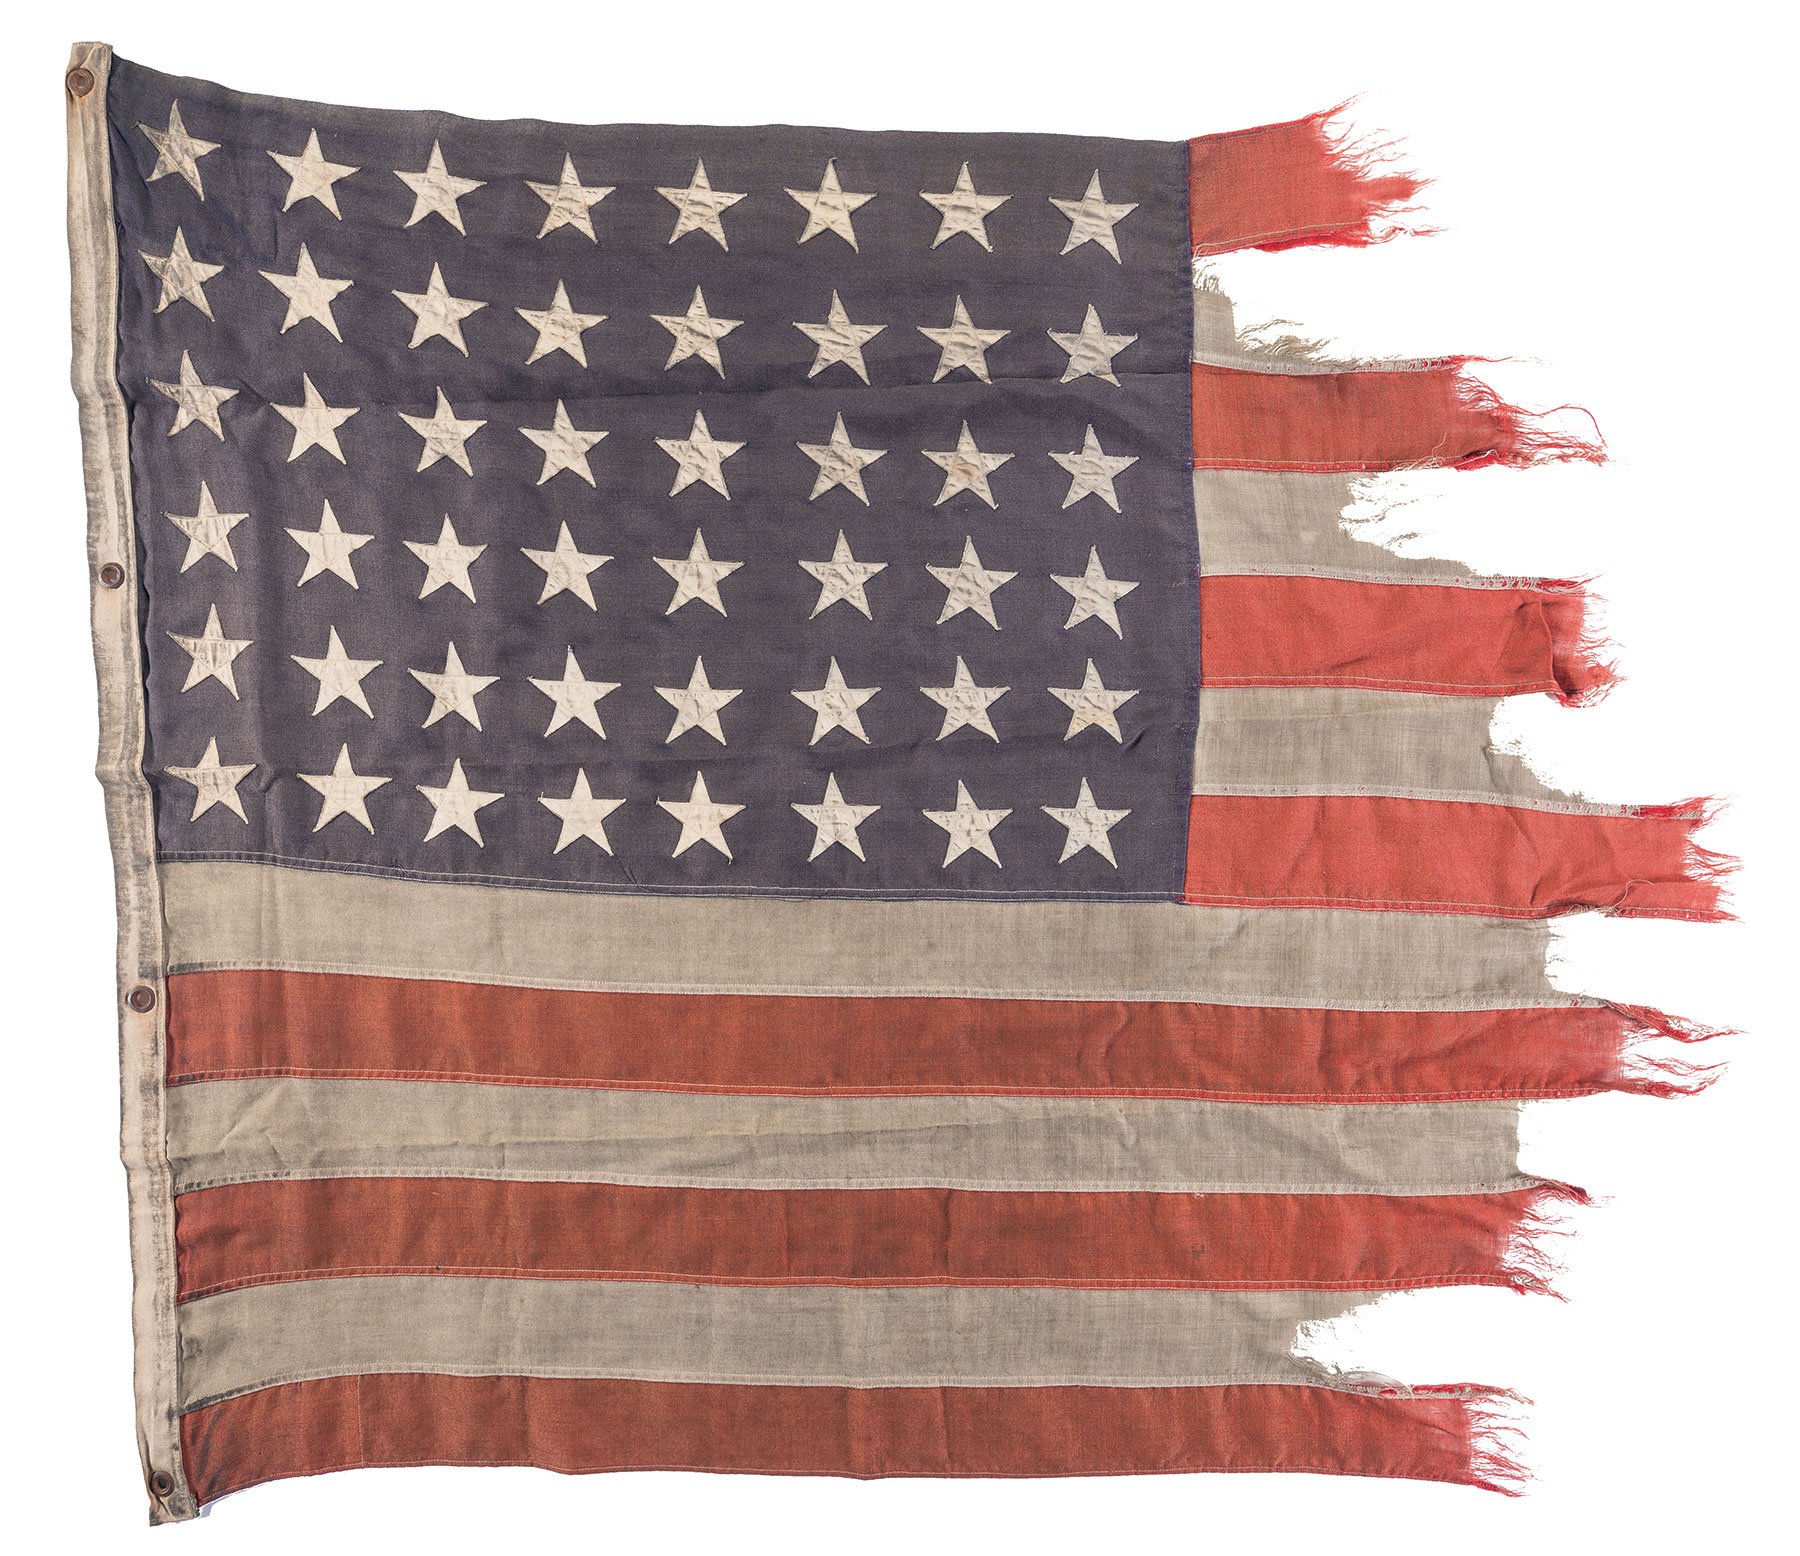 The American flag flew on the LCI(L)-421 during the D-Day invasion of Normandy on June 6, 1944. (Photo: Rock Island Auction Company)